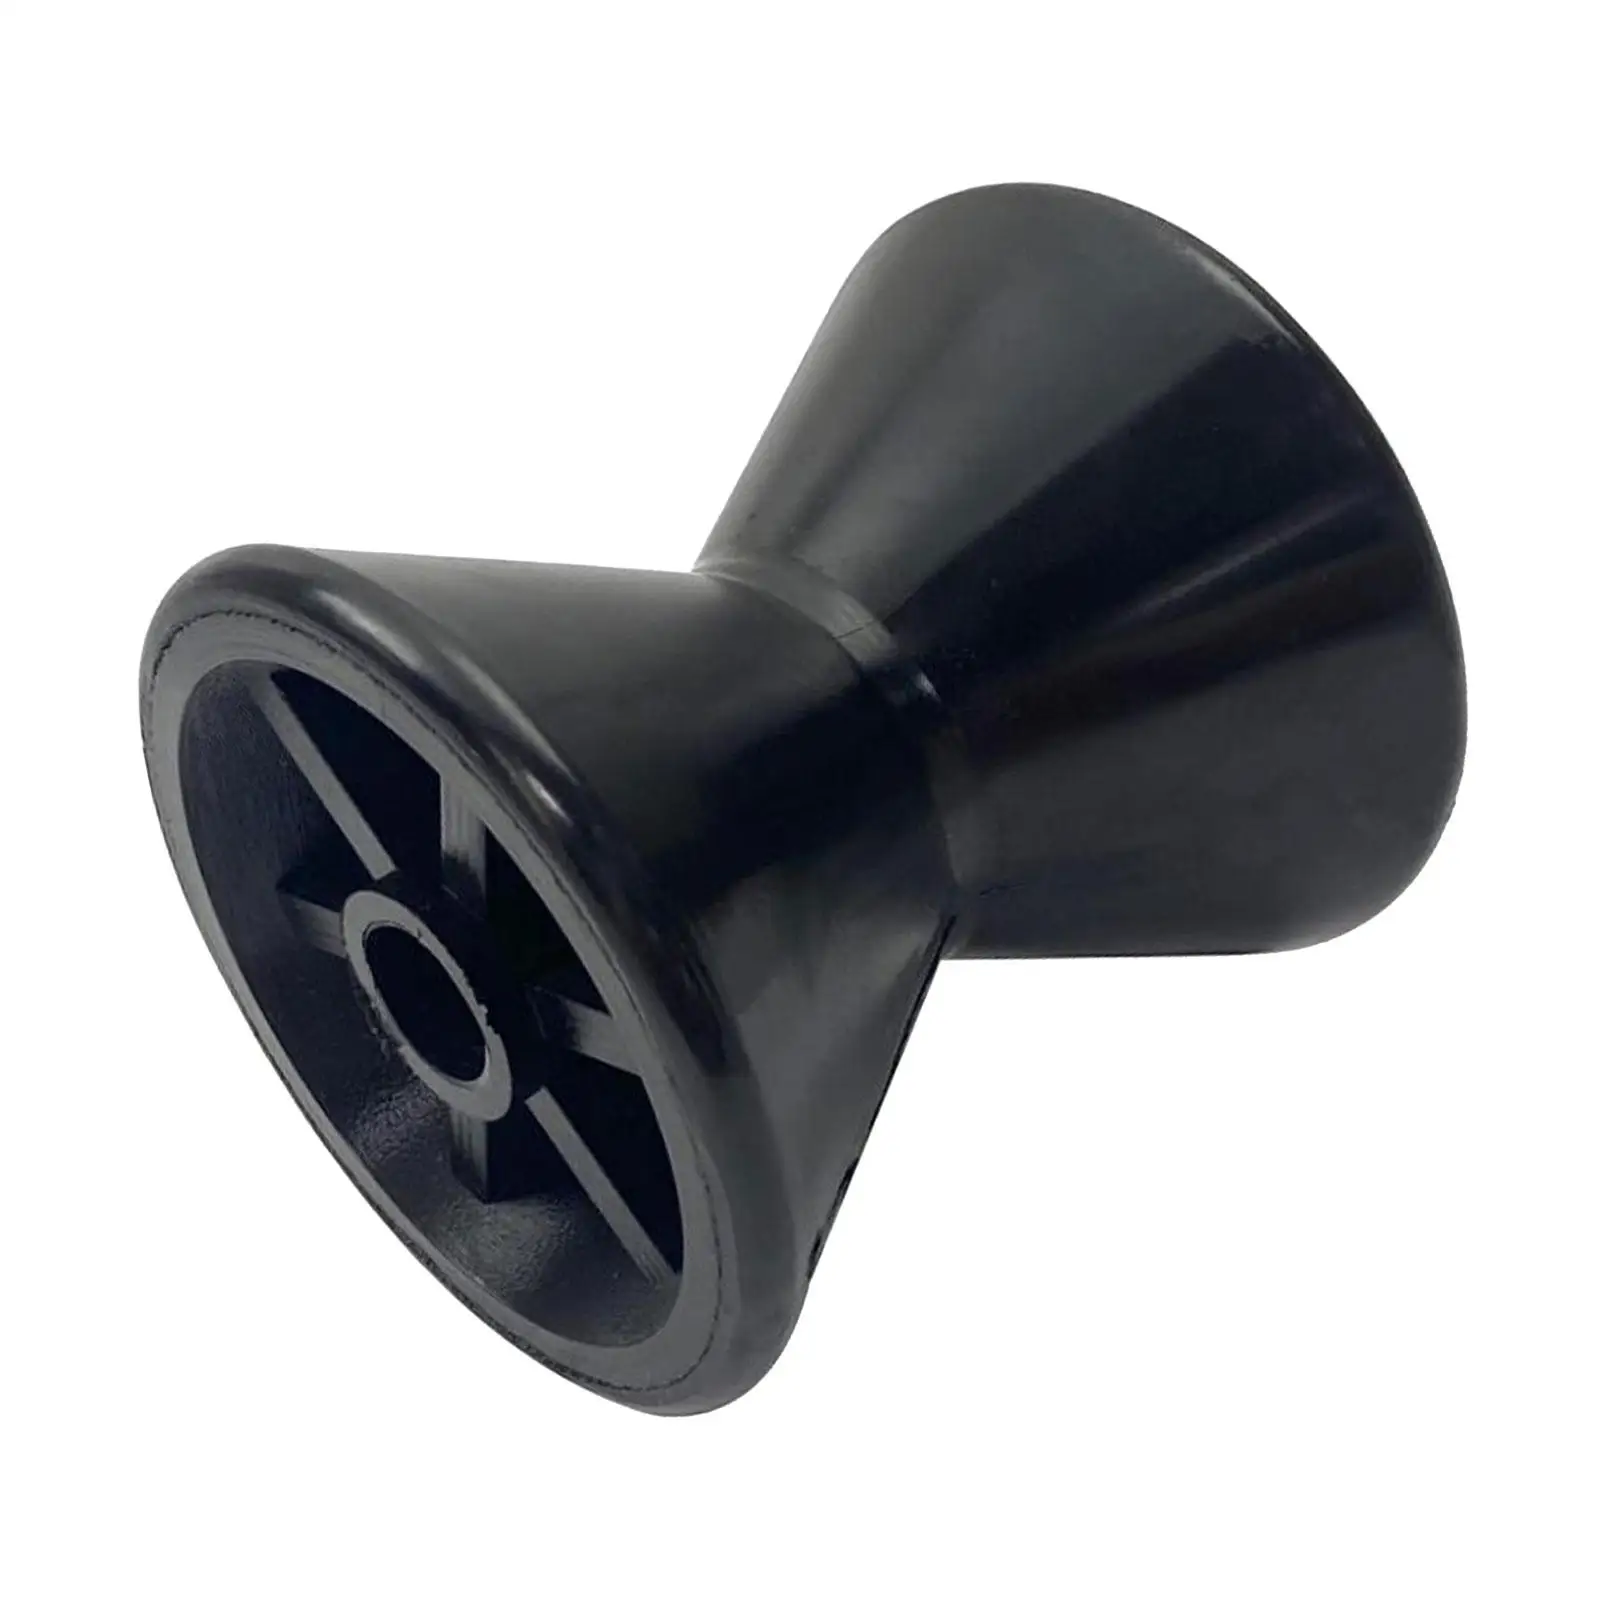 Bow Roller 3.5 inch Durable Supplies High Performance Black Replace Parts Accessory Ego Trailer Parts Rubber Bow Roller